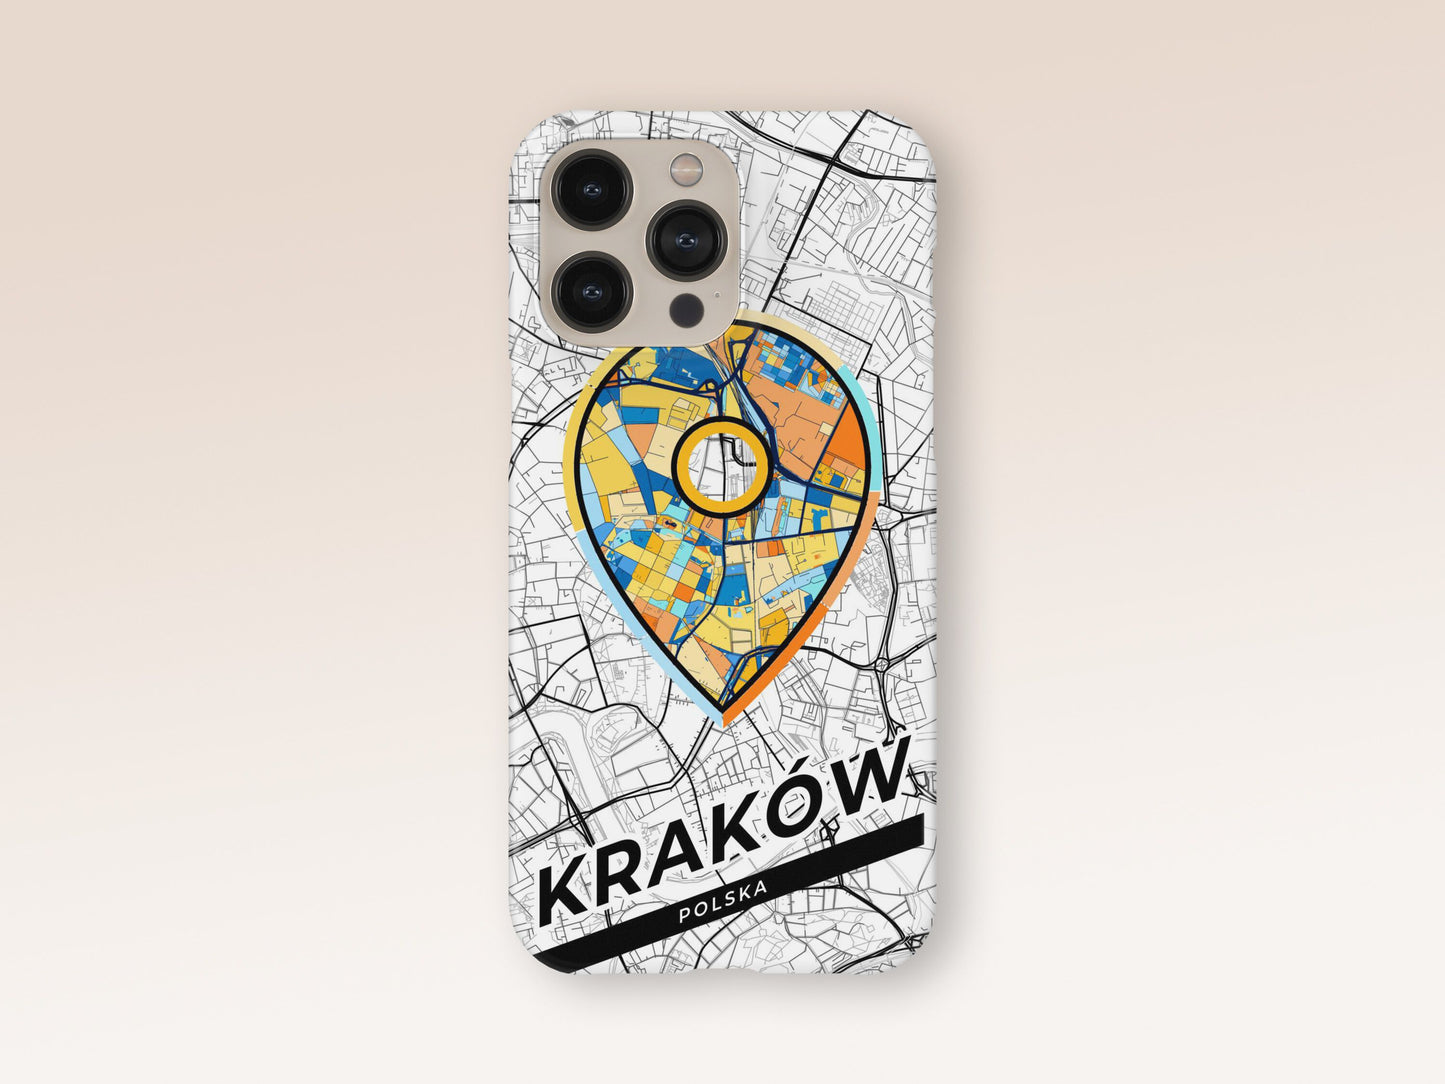 Kraków Poland slim phone case with colorful icon. Birthday, wedding or housewarming gift. Couple match cases. 1